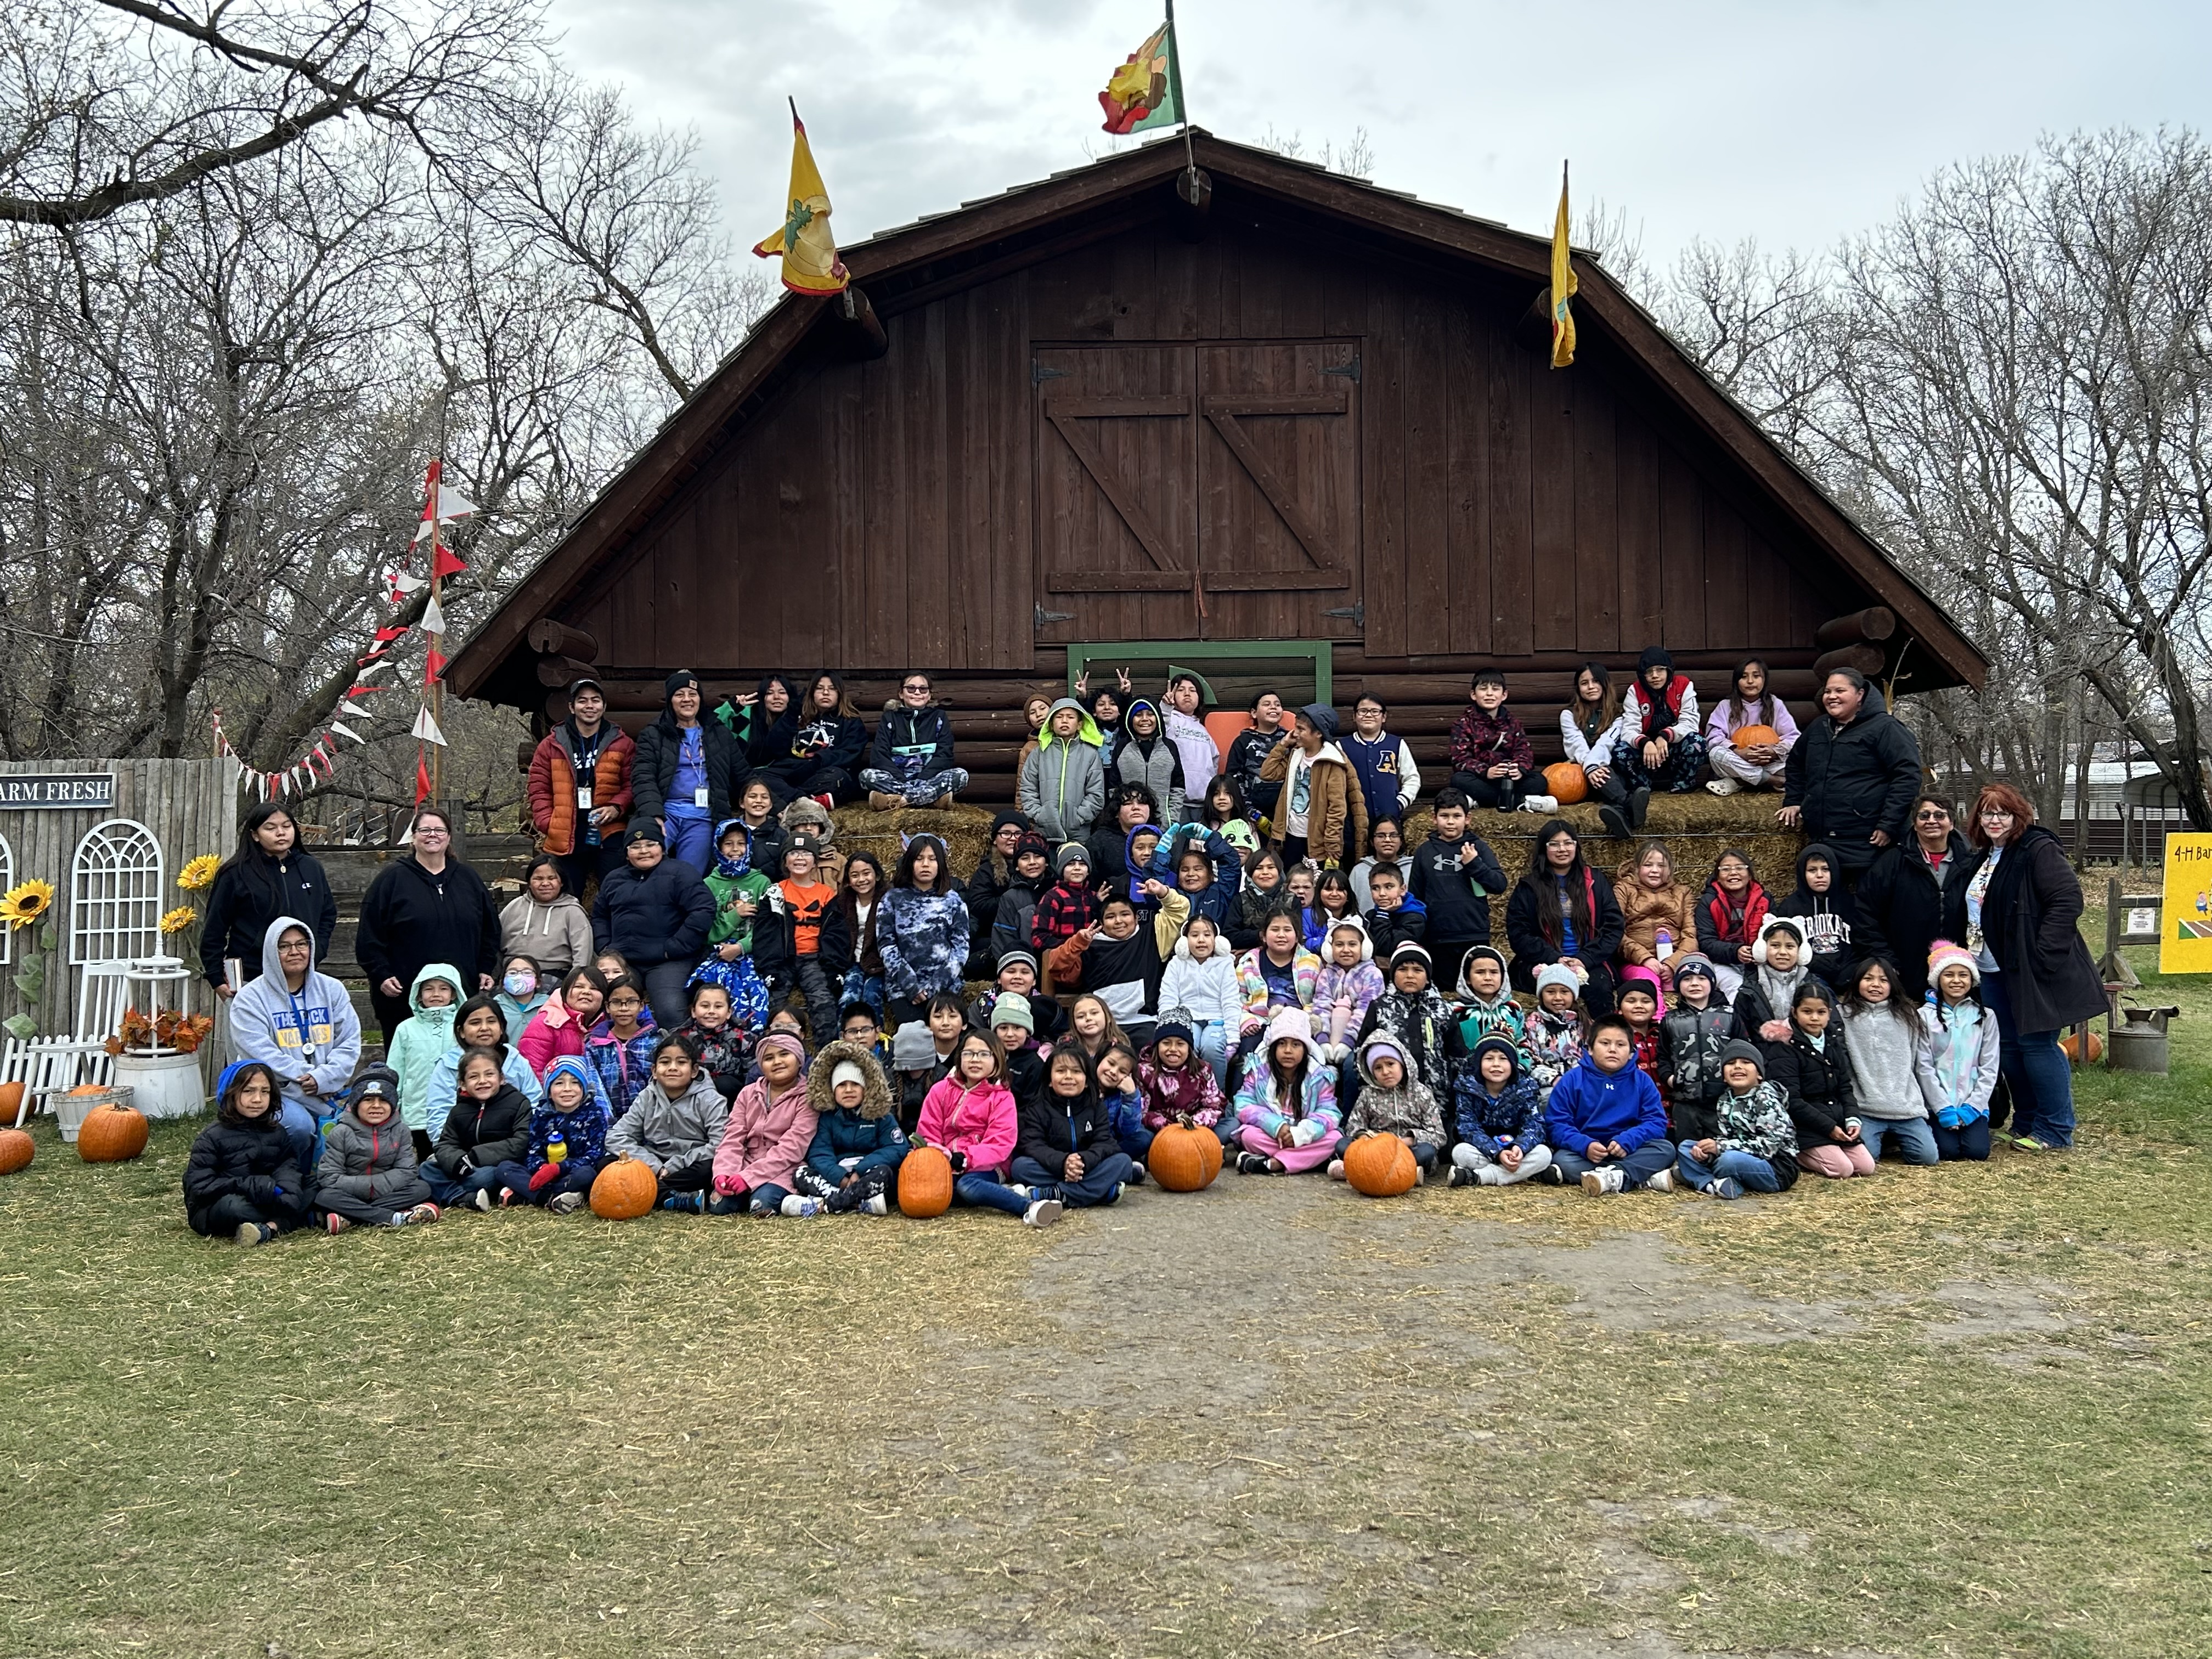 Students in front of barn at pumpkin patch